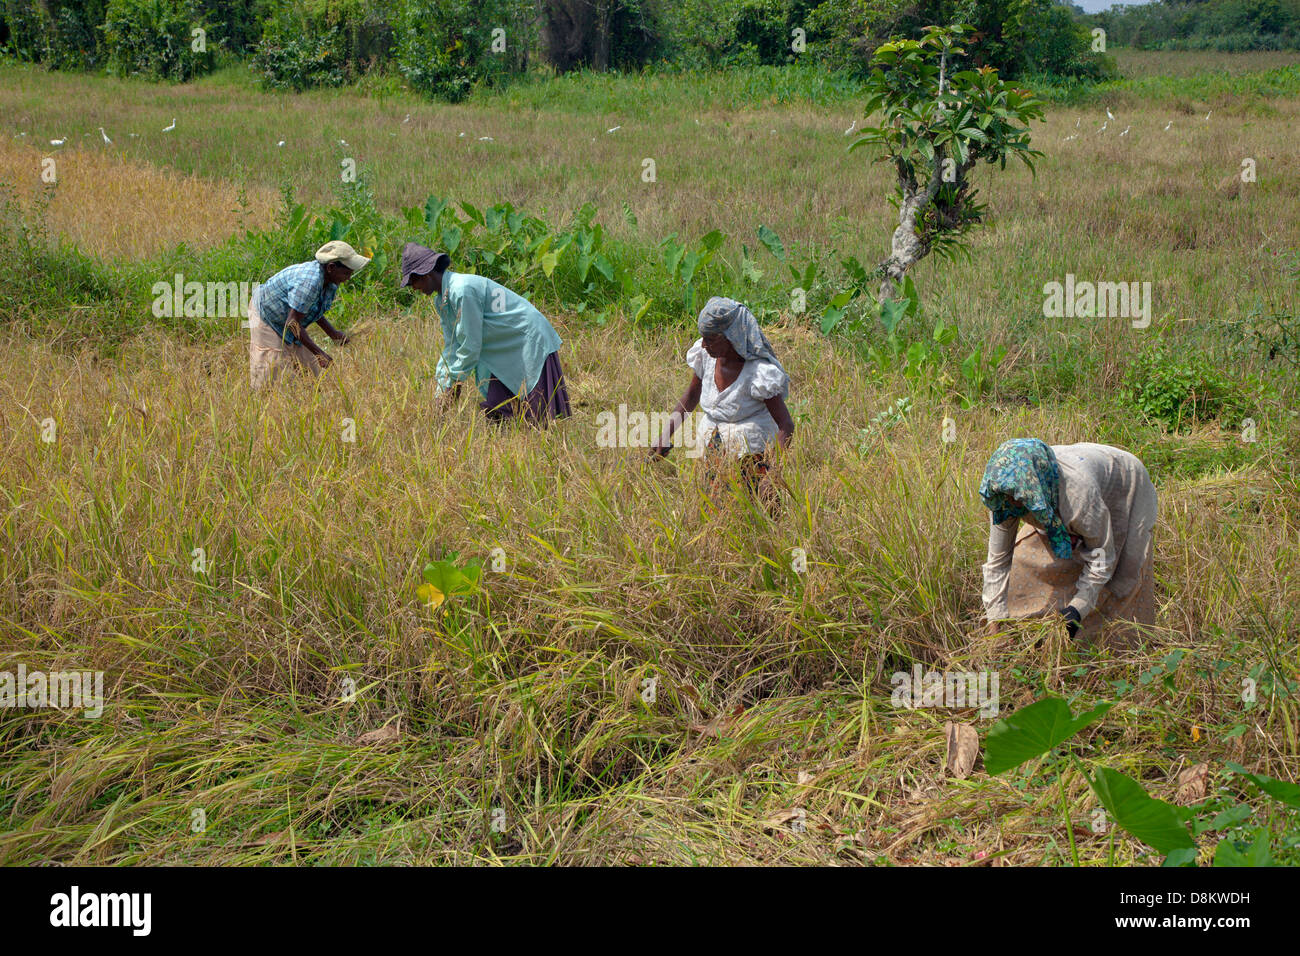 Rice Harvesting by hand in Sri Lanka March Stock Photo